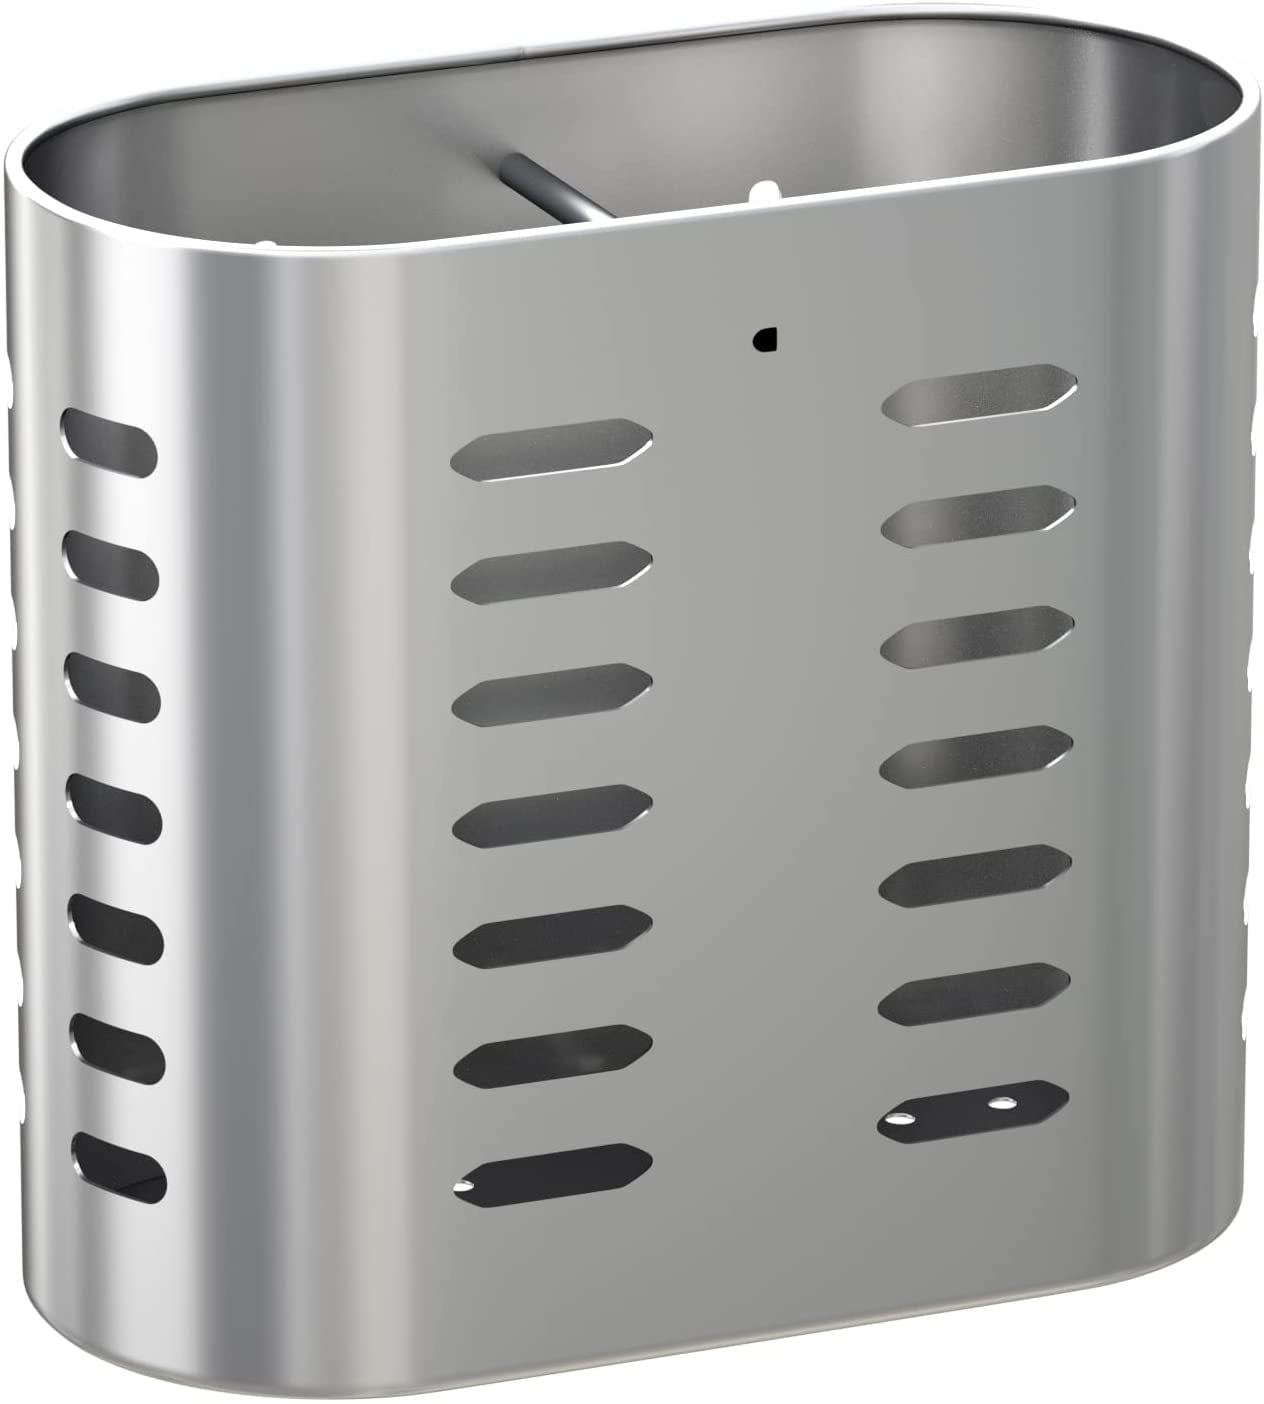 organ climate Set out Stainless Steel Kitchen Utensil Holder for Countertop - Spoon and Fork  Holder Silverware Caddy - Hanging Utensil Holder (1 pc - Stainless Steel  Mirror Finish) - Walmart.com